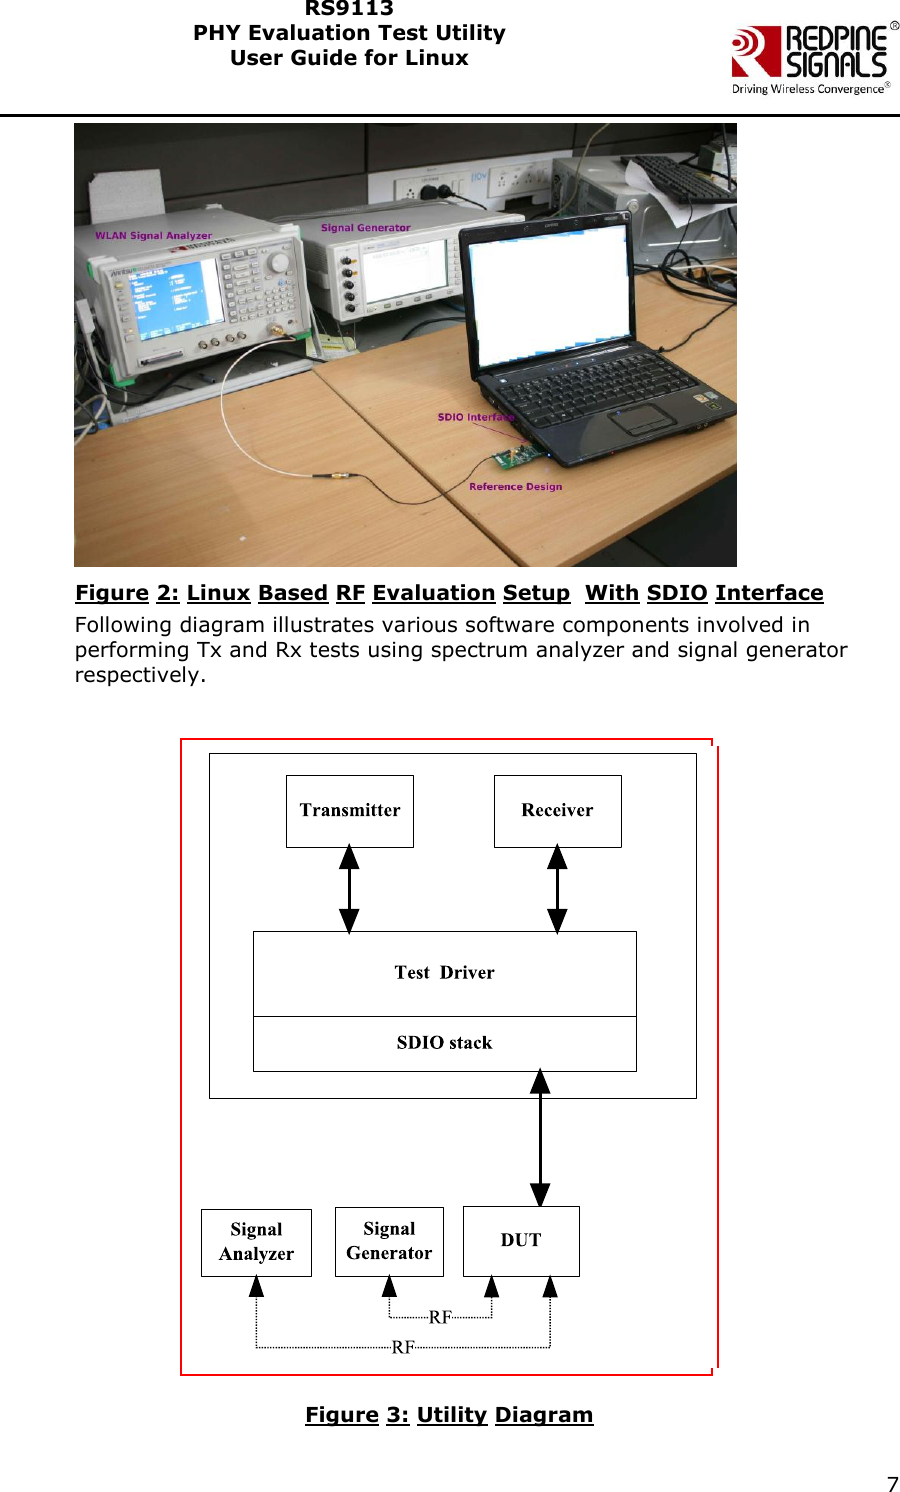    7  RS9113 PHY Evaluation Test Utility  User Guide for Linux   Figure 2: Linux Based RF Evaluation Setup  With SDIO Interface Following diagram illustrates various software components involved in performing Tx and Rx tests using spectrum analyzer and signal generator respectively.    Figure 3: Utility Diagram 